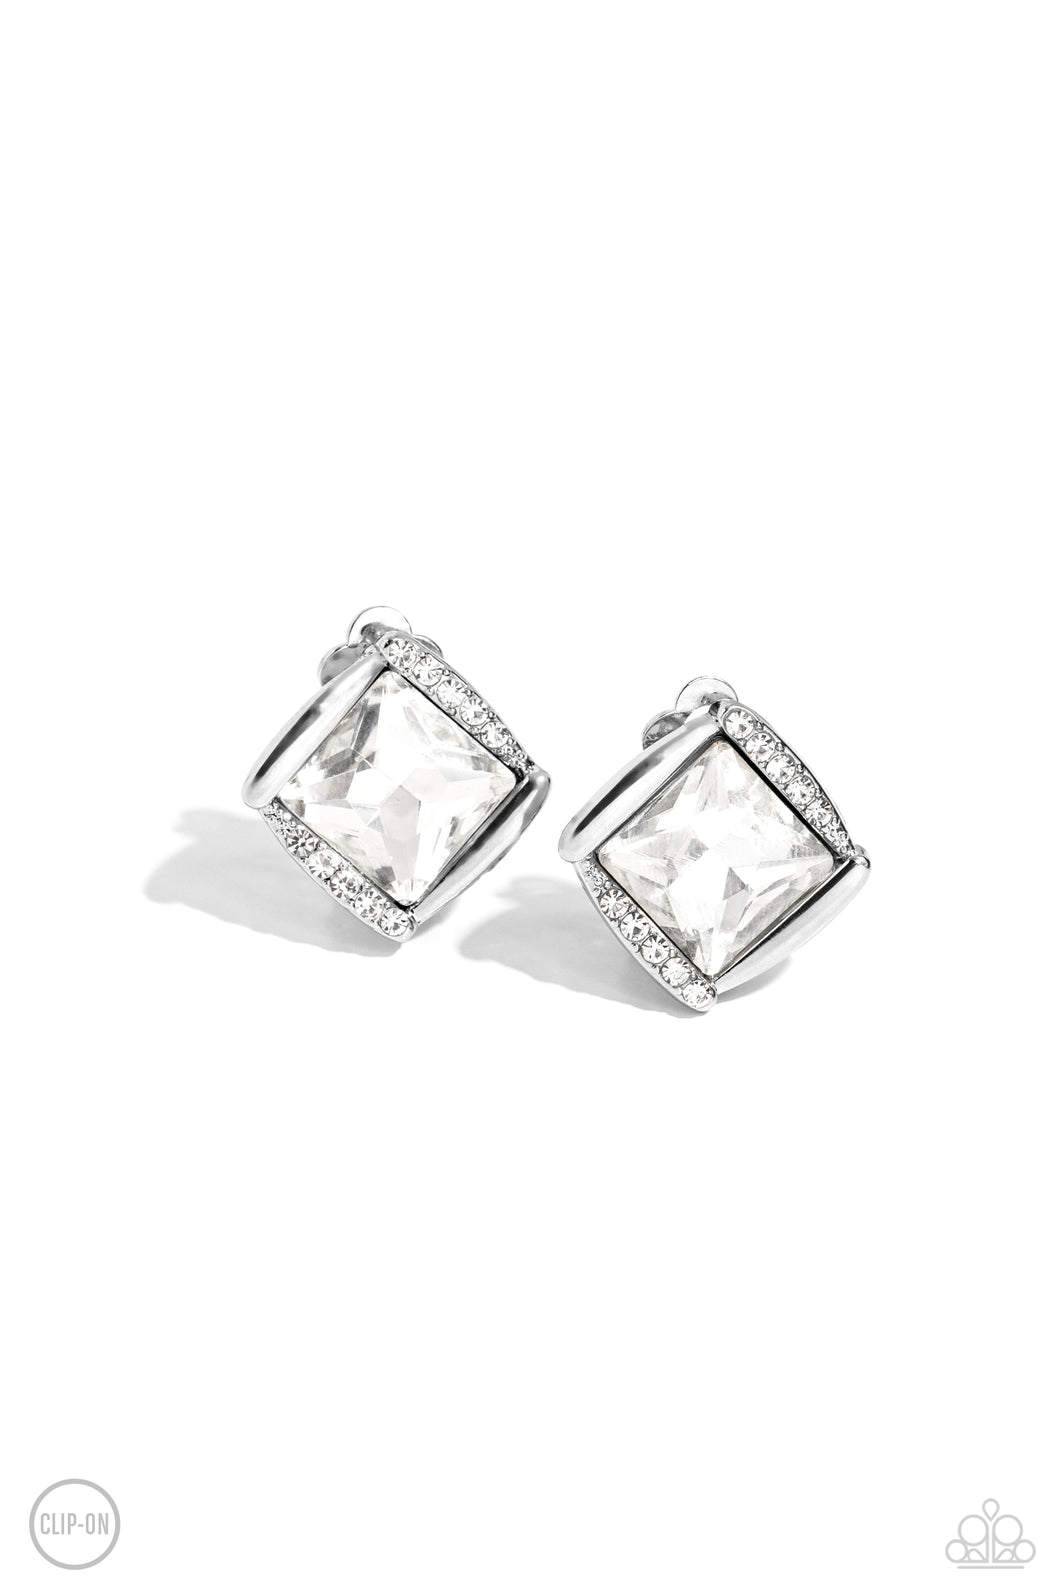 Sparkle Squared - White (Rhinestone) Clip-On Earring